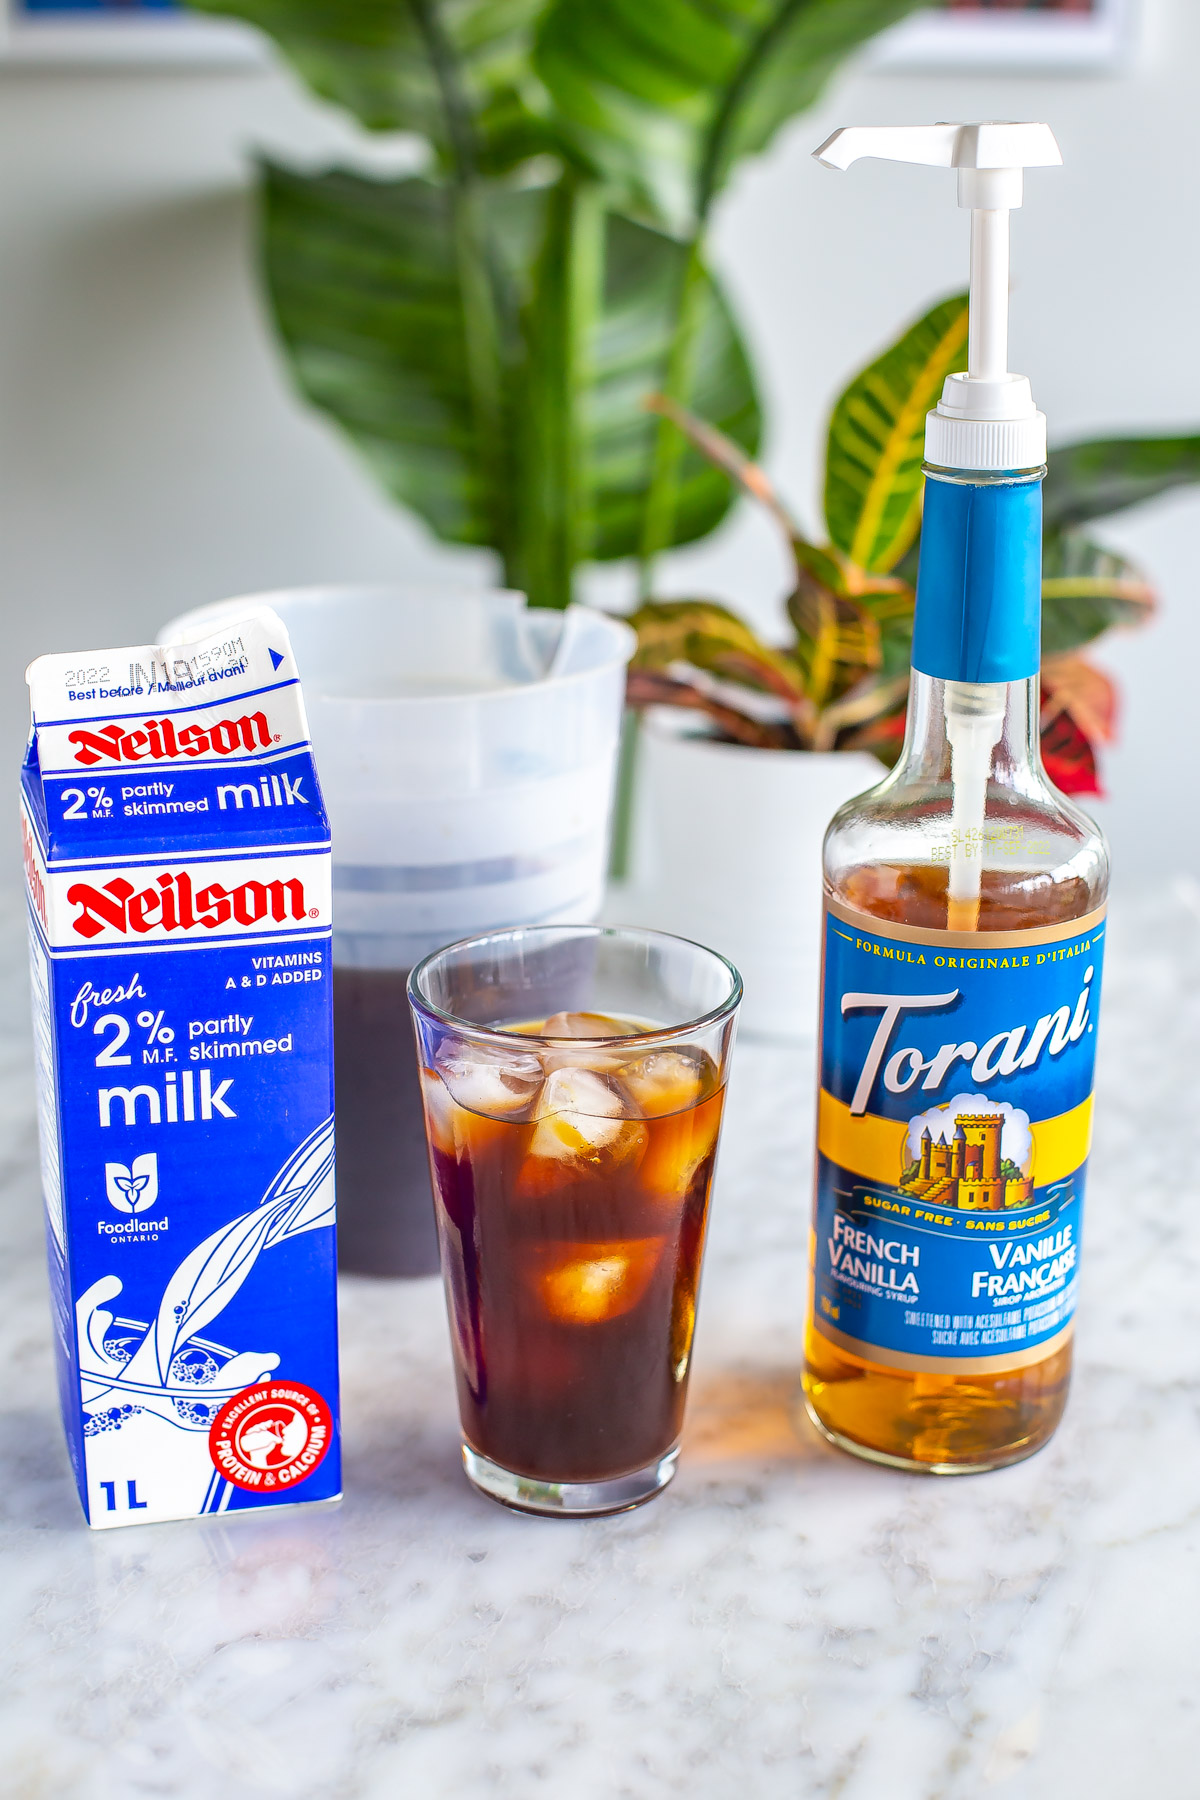 A glass of french vanilla cold brew placed in between a carton of milk and french vanilla syrup.